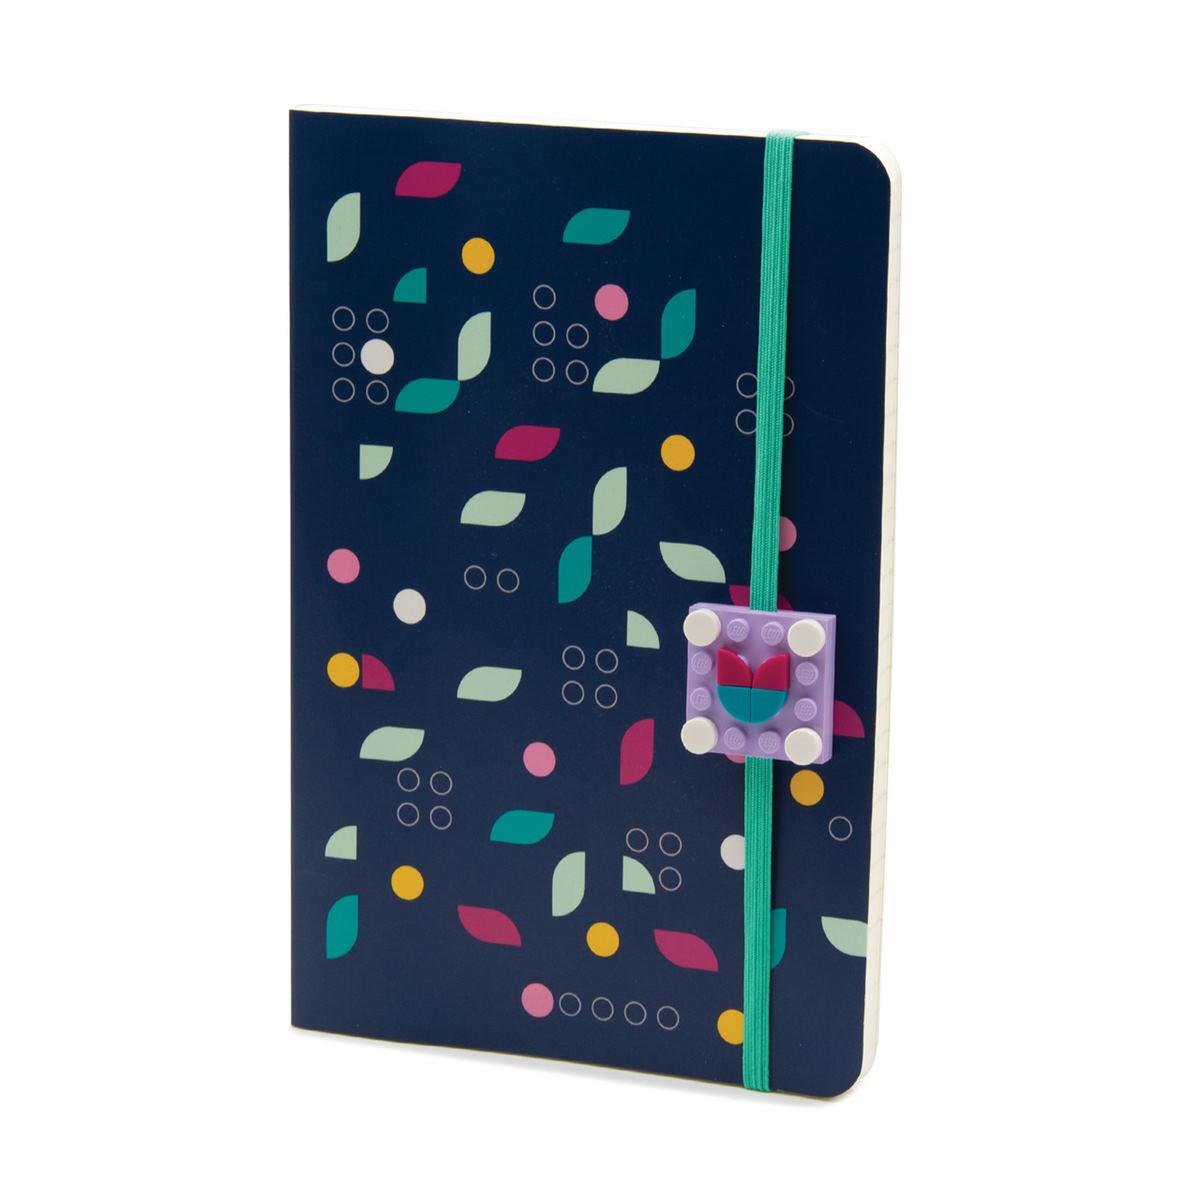 Lego Dots Notebook With Charm